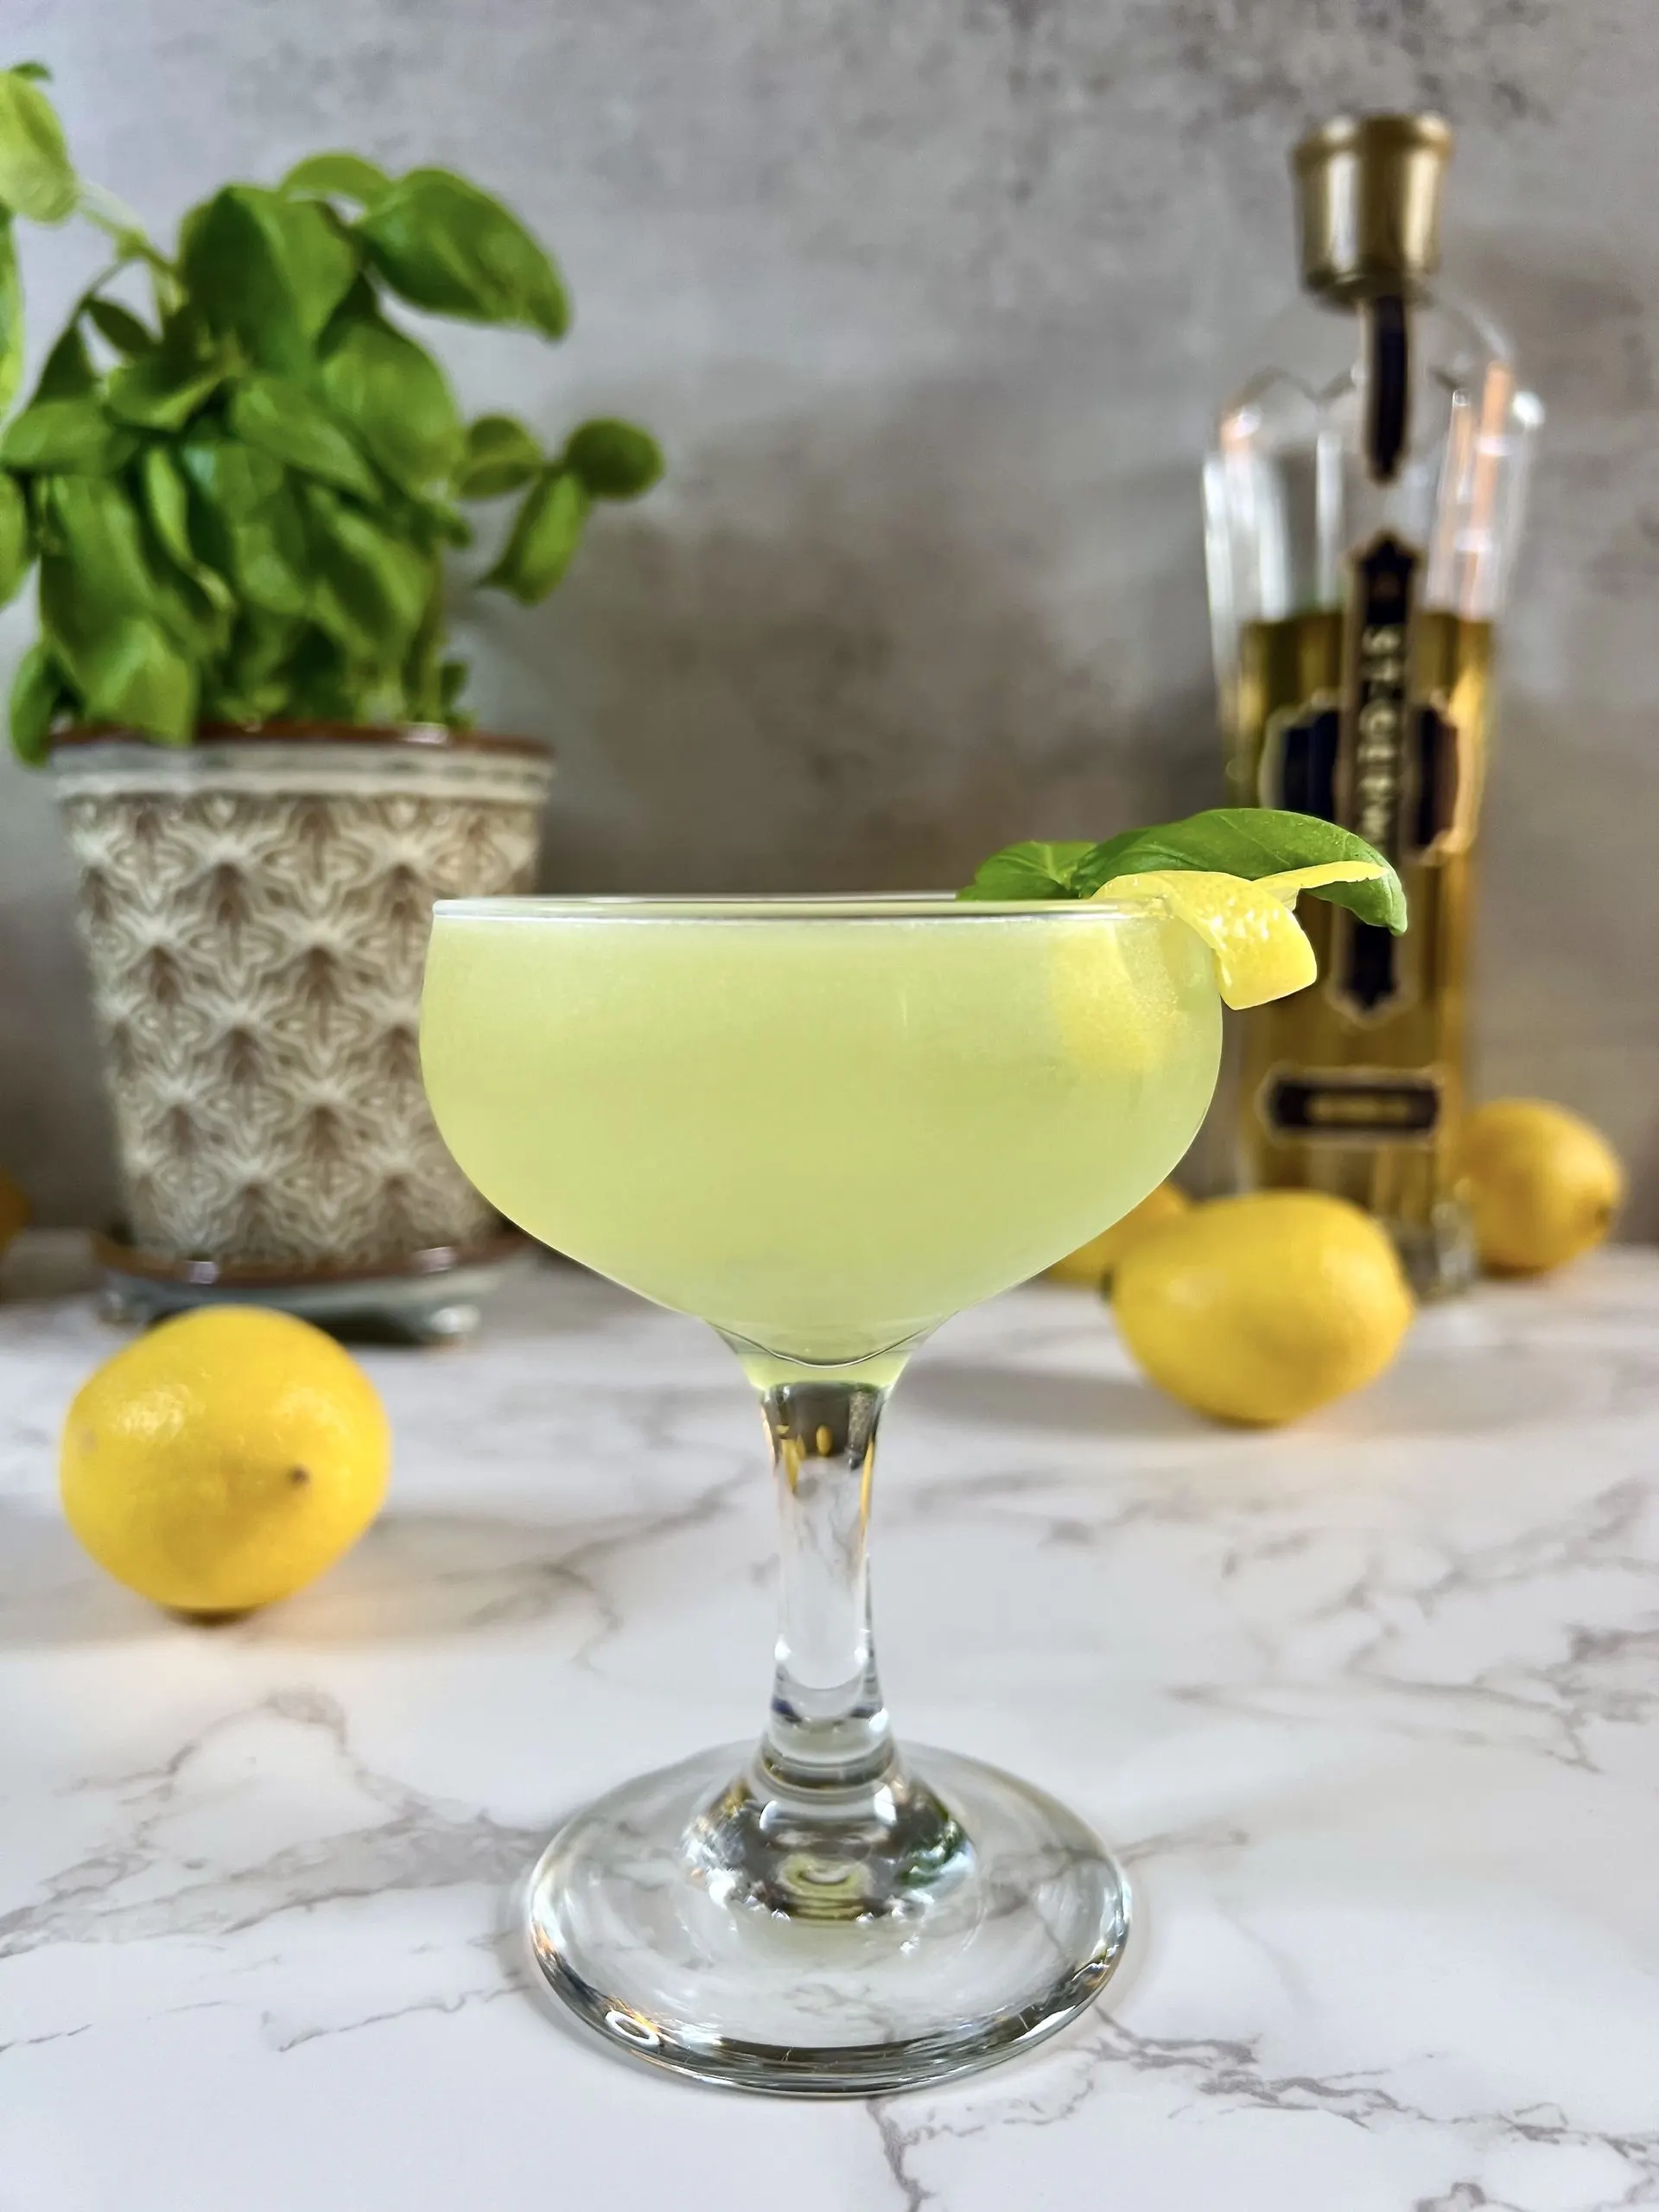 A straight on shot of a St Germain Lemon Basil Martini with a lemon twist and sprig of basil surrounded by lemons in front of a basil plant and a bottle of St Germain liqueur.